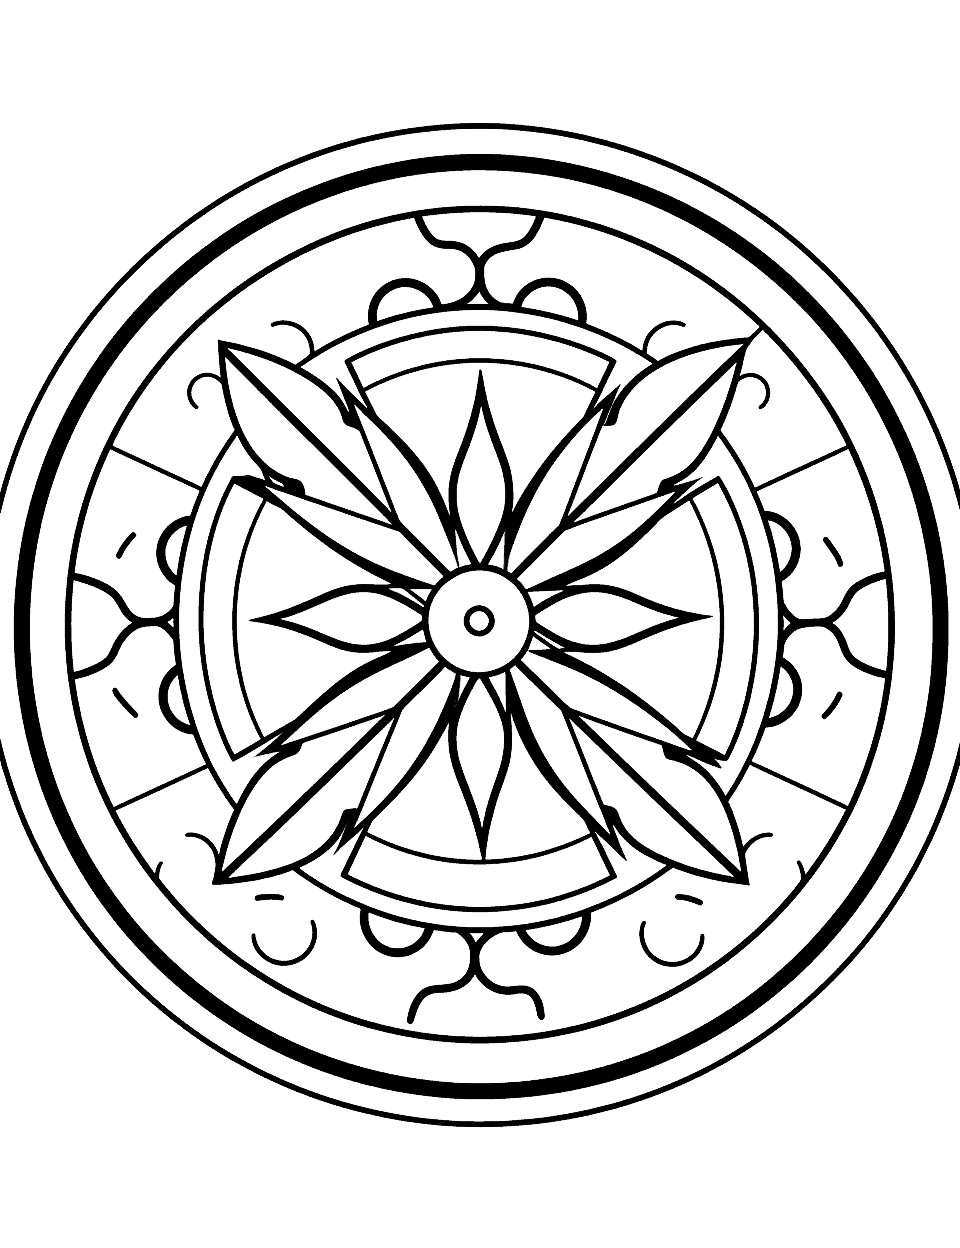 Whimsical Windmill Mandala Coloring Page - A mandala featuring a windmill surrounded by wheat fields and country elements, great for teaching kids about farming.